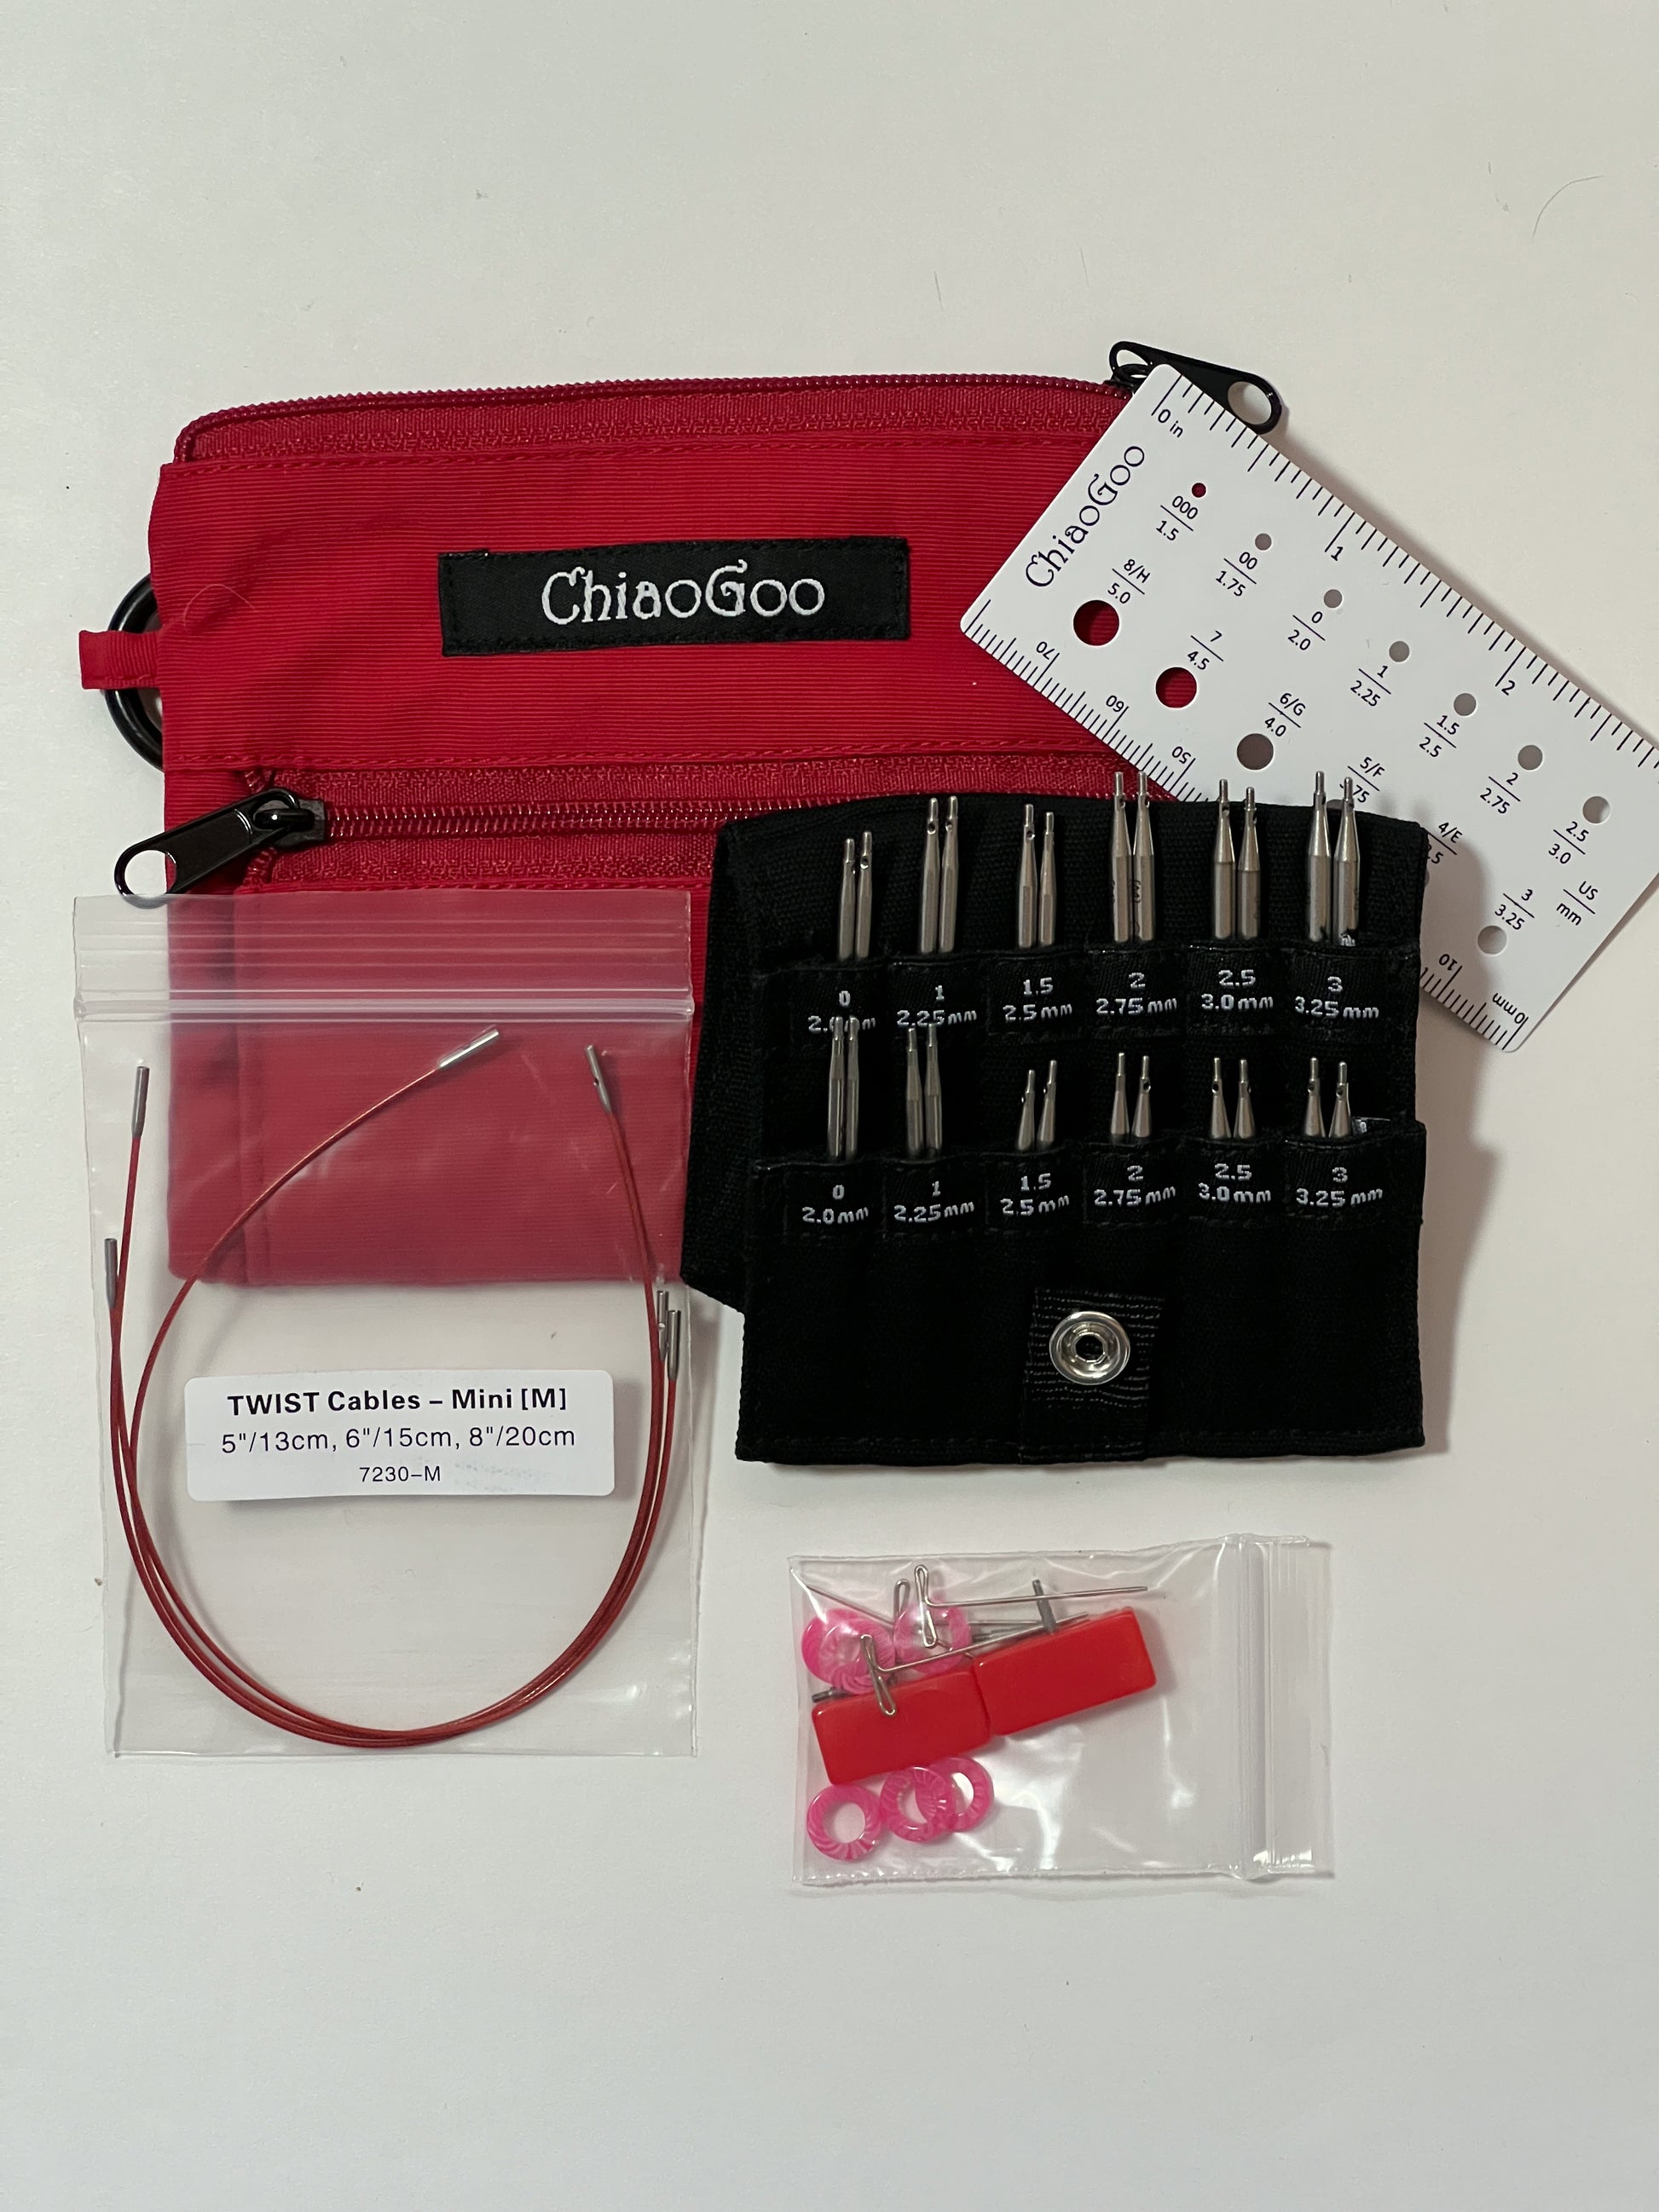 Chiaogoo Twist SHORTIES Set S 5cm and 8cm 2'' and 3